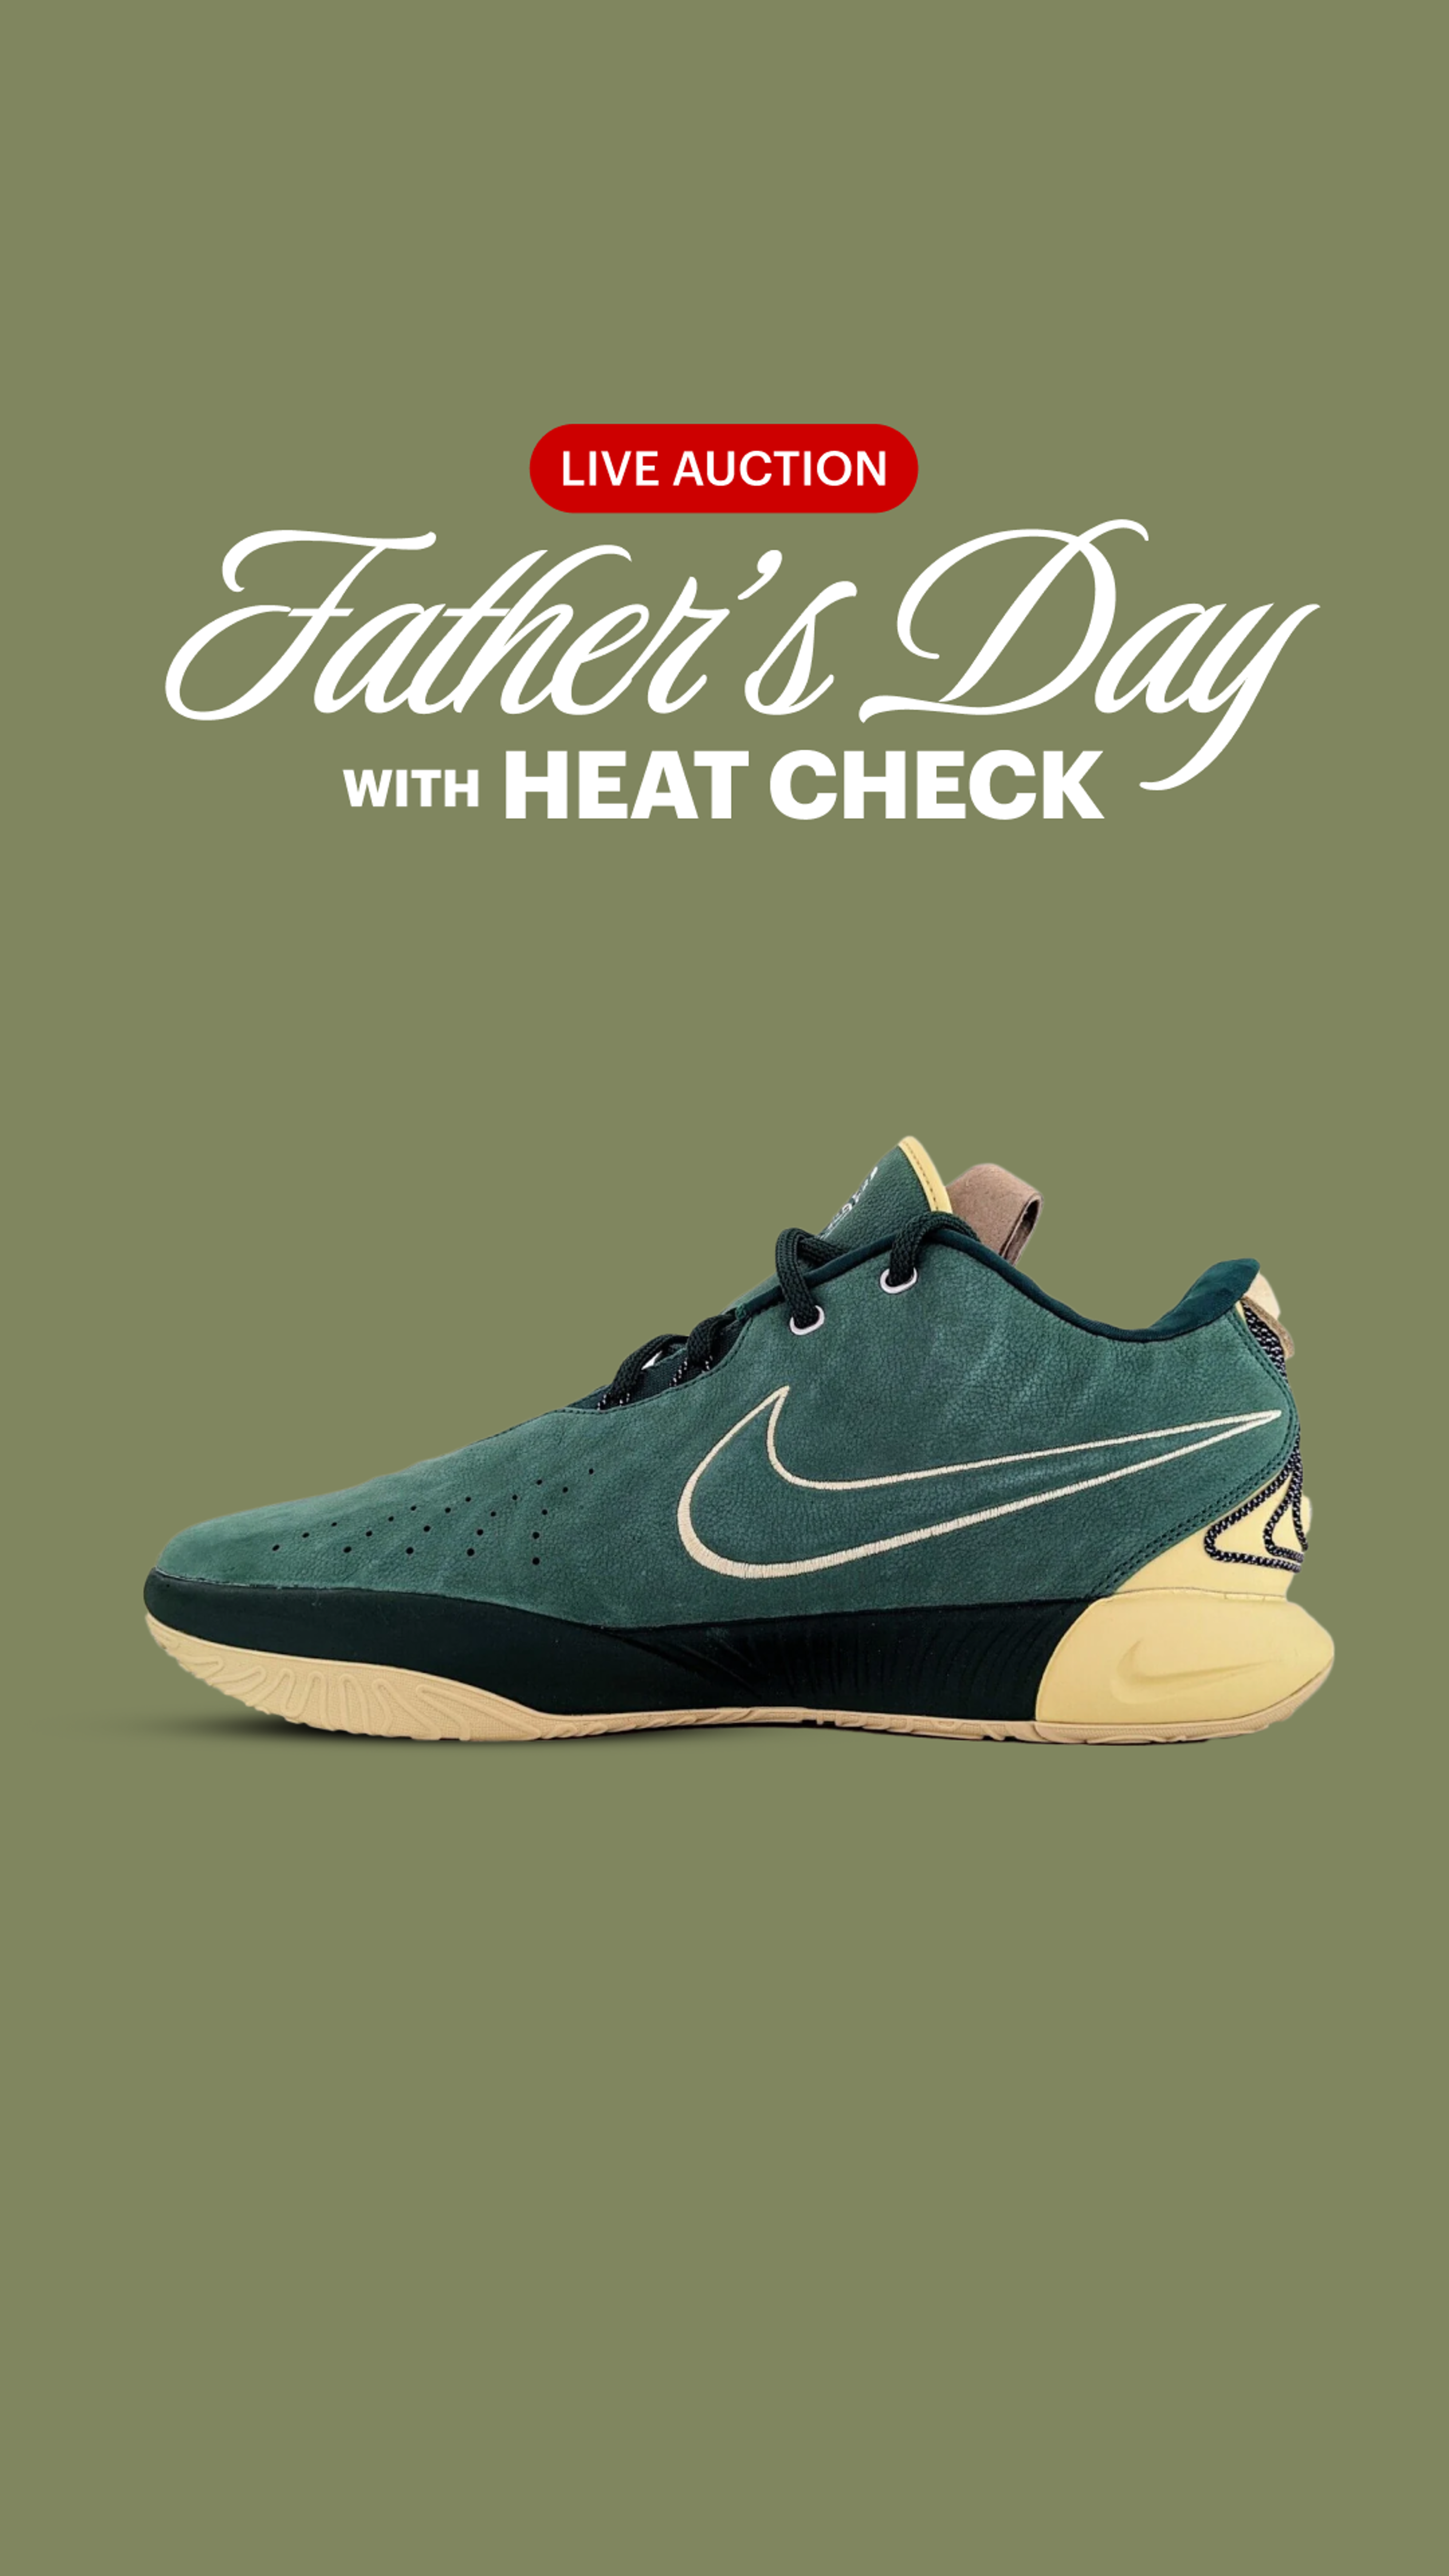 Preview image for the show titled "NTWRK Curated Shopping Guide: Father's Day w/ The Heat Check" at Today @ 5:00 PM